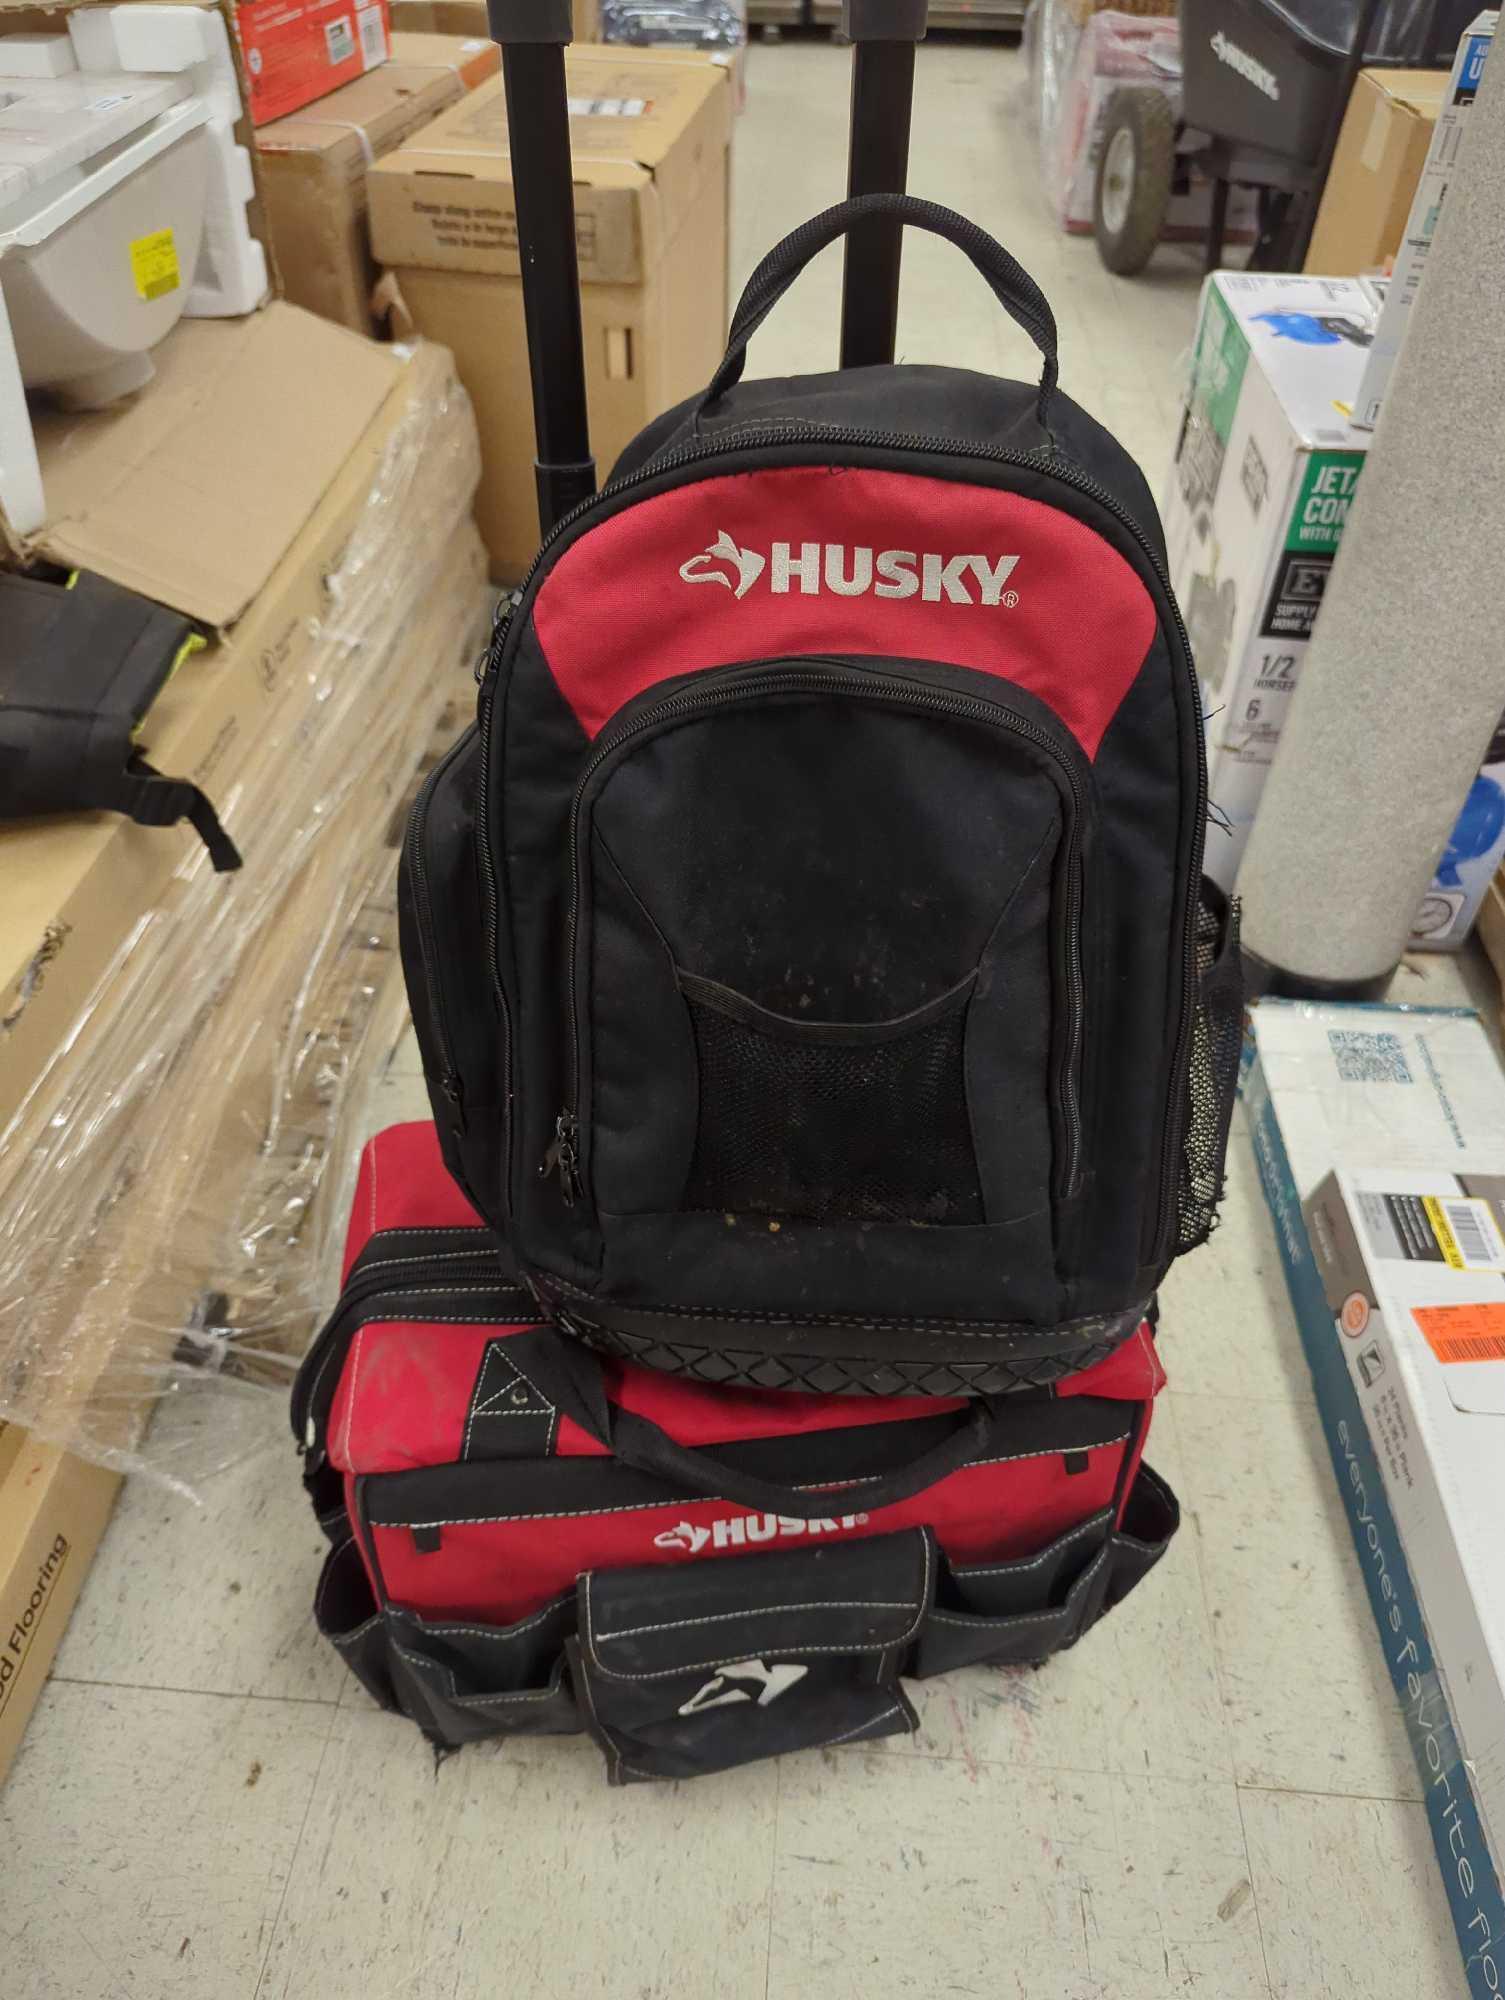 Lot of 2 Husky Items to Include, Husky 18 in. 18 Pocket Rolling Tool Bag, Appears to be Used Retail